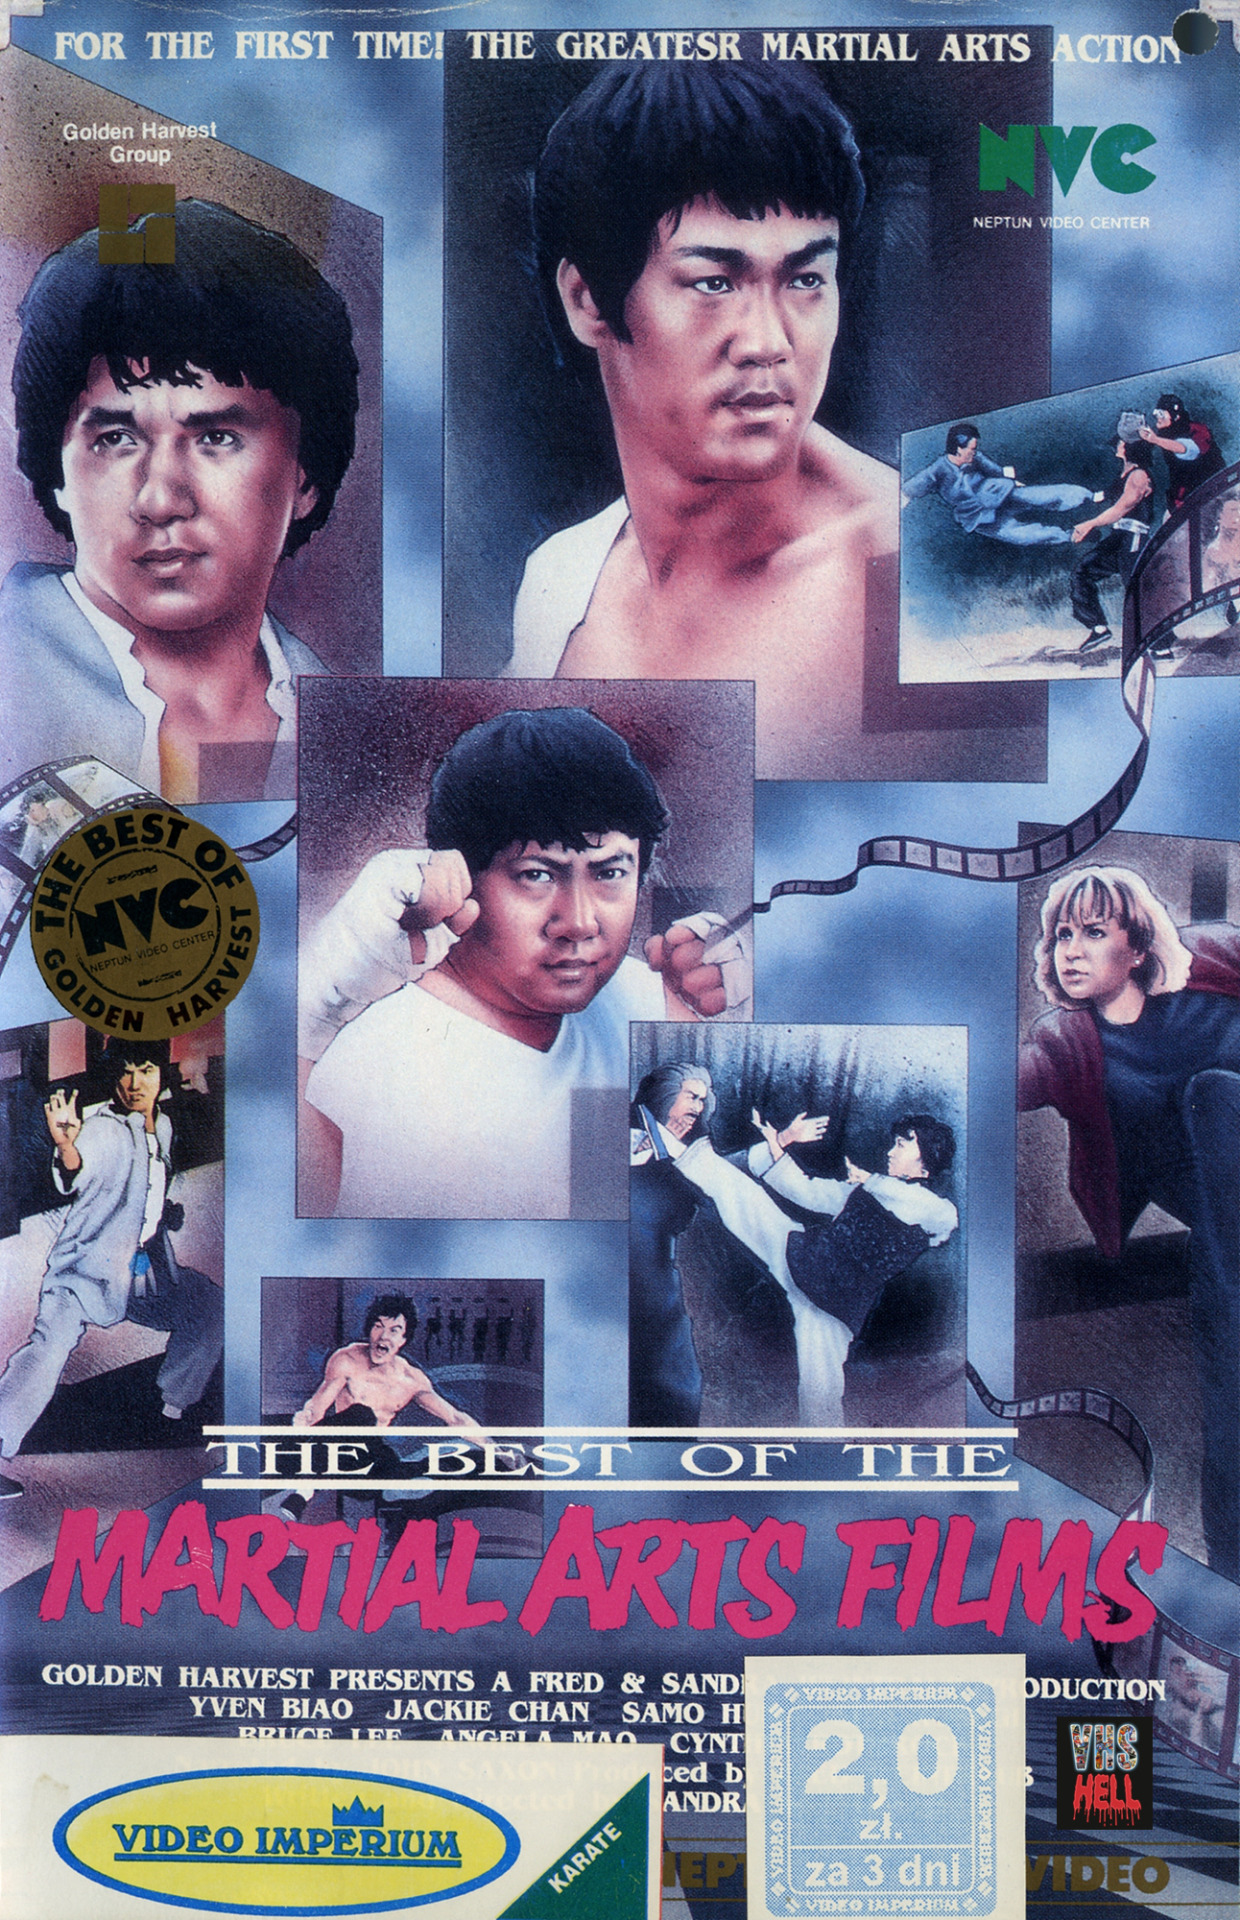 The Best of the Martial Arts Films (1990) Screenshot 3 